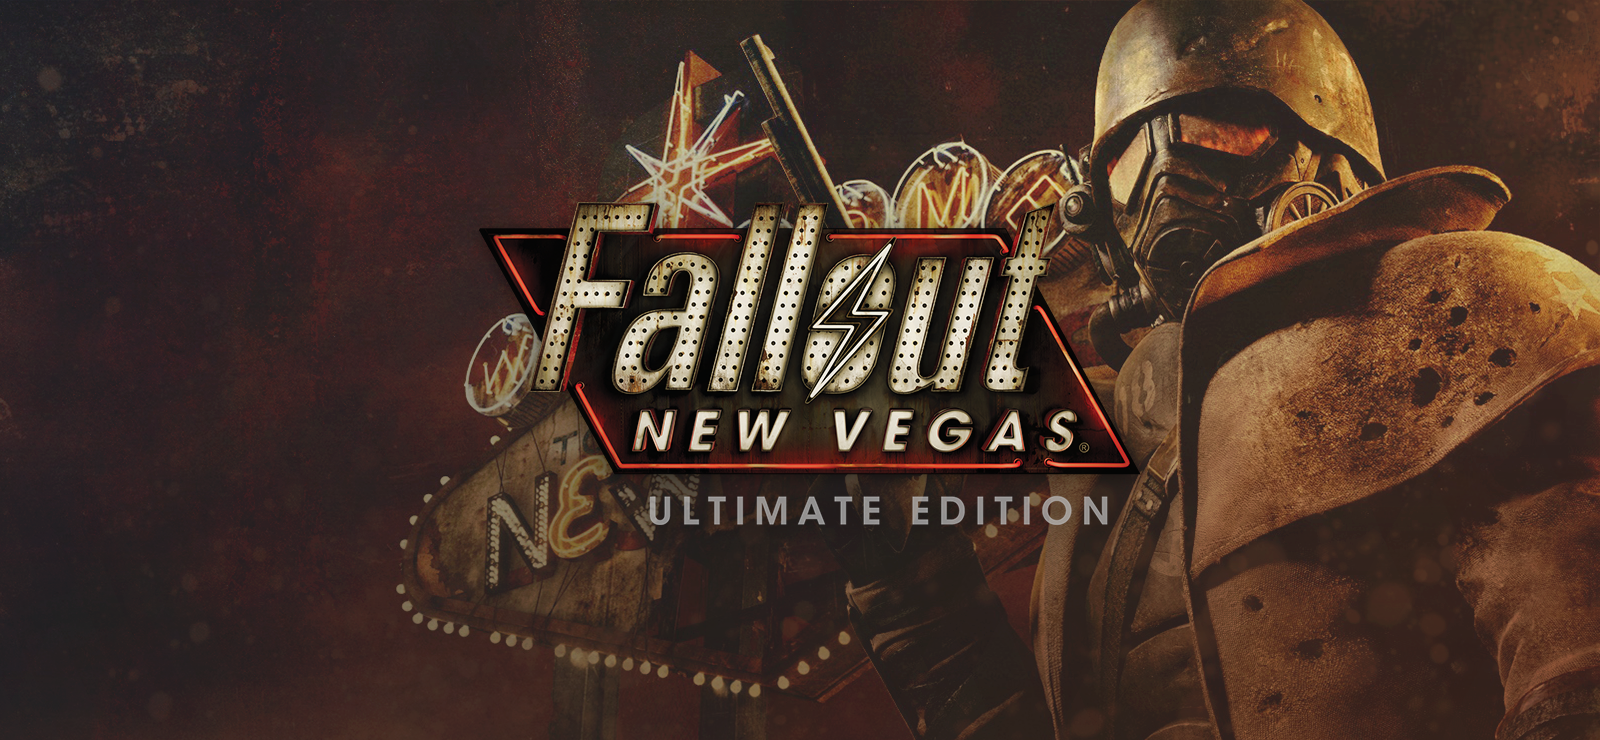 BESTSELLER - Fallout: New Vegas Ultimate Edition